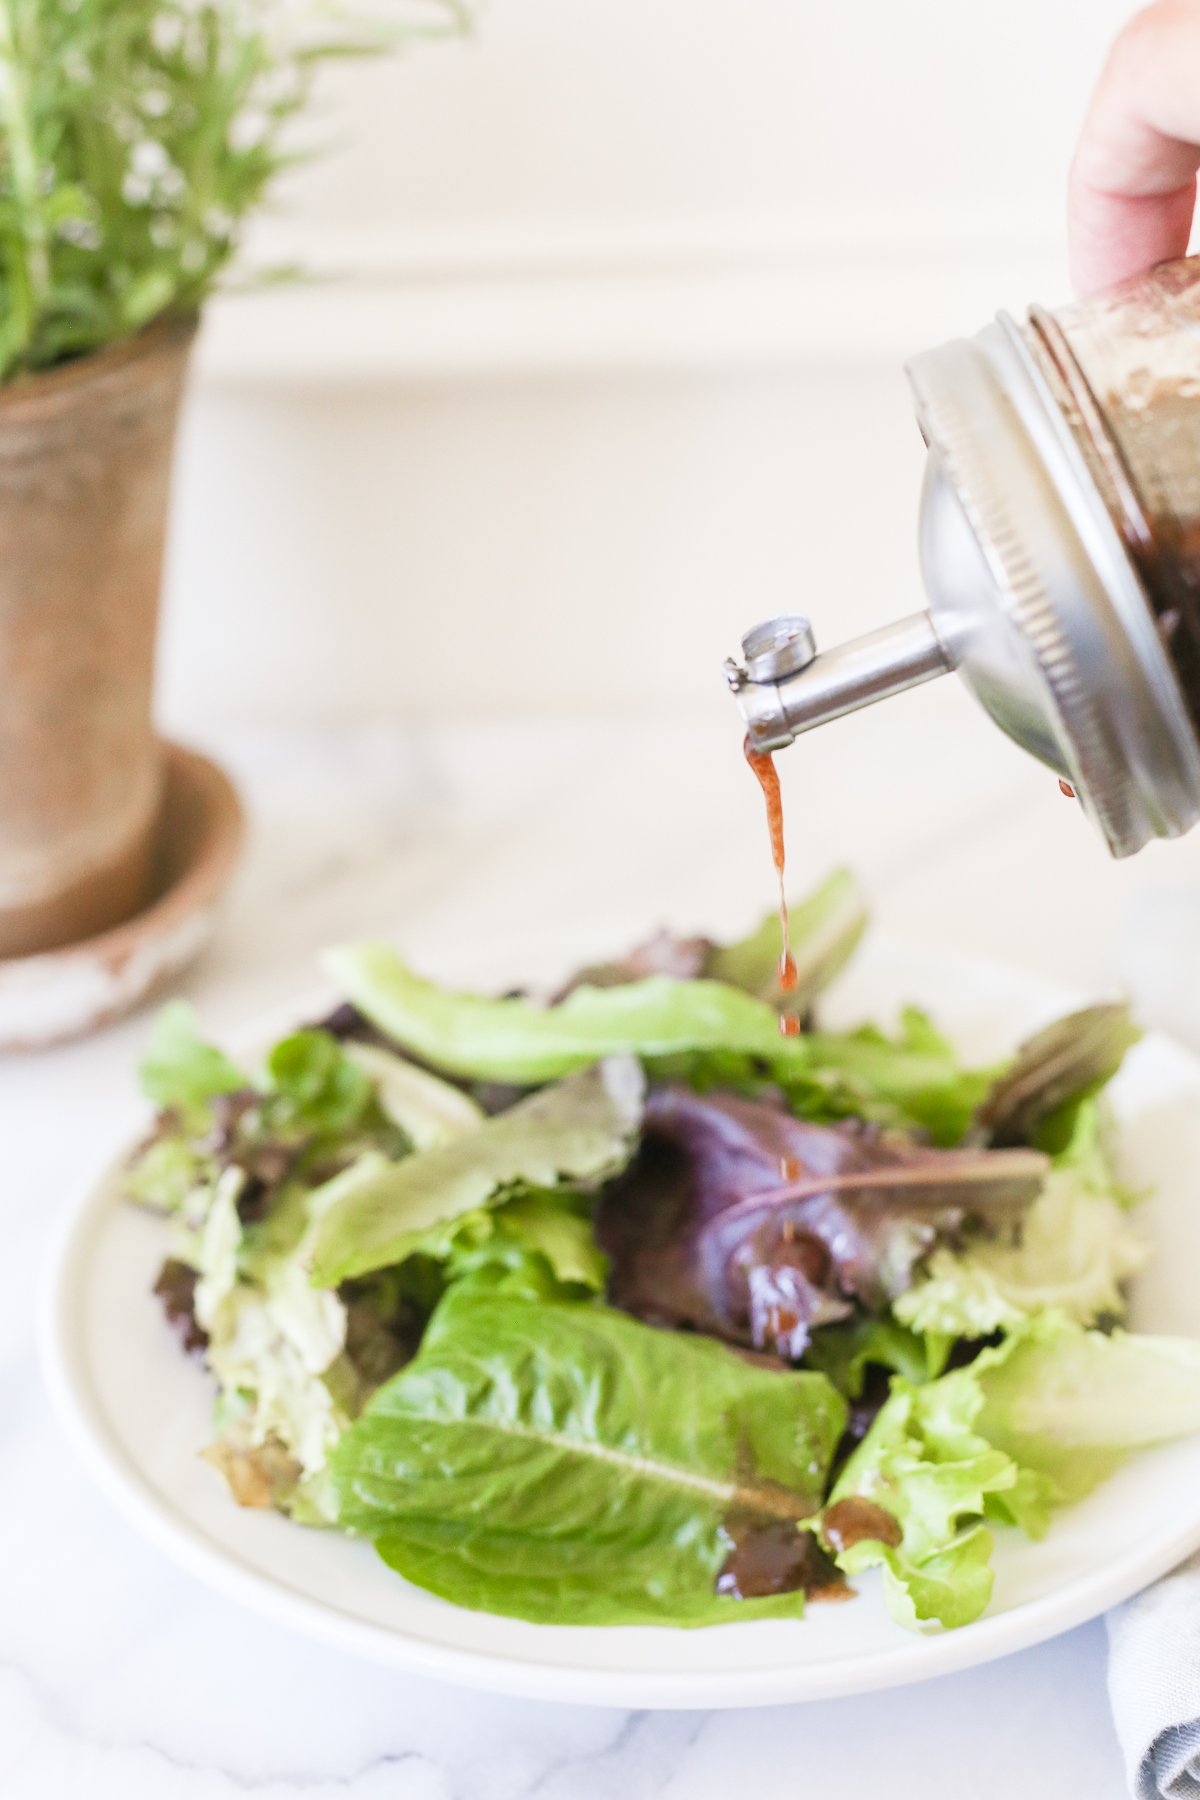 Balsamic vinaigrette in a glass bottle, pouring over a salad.